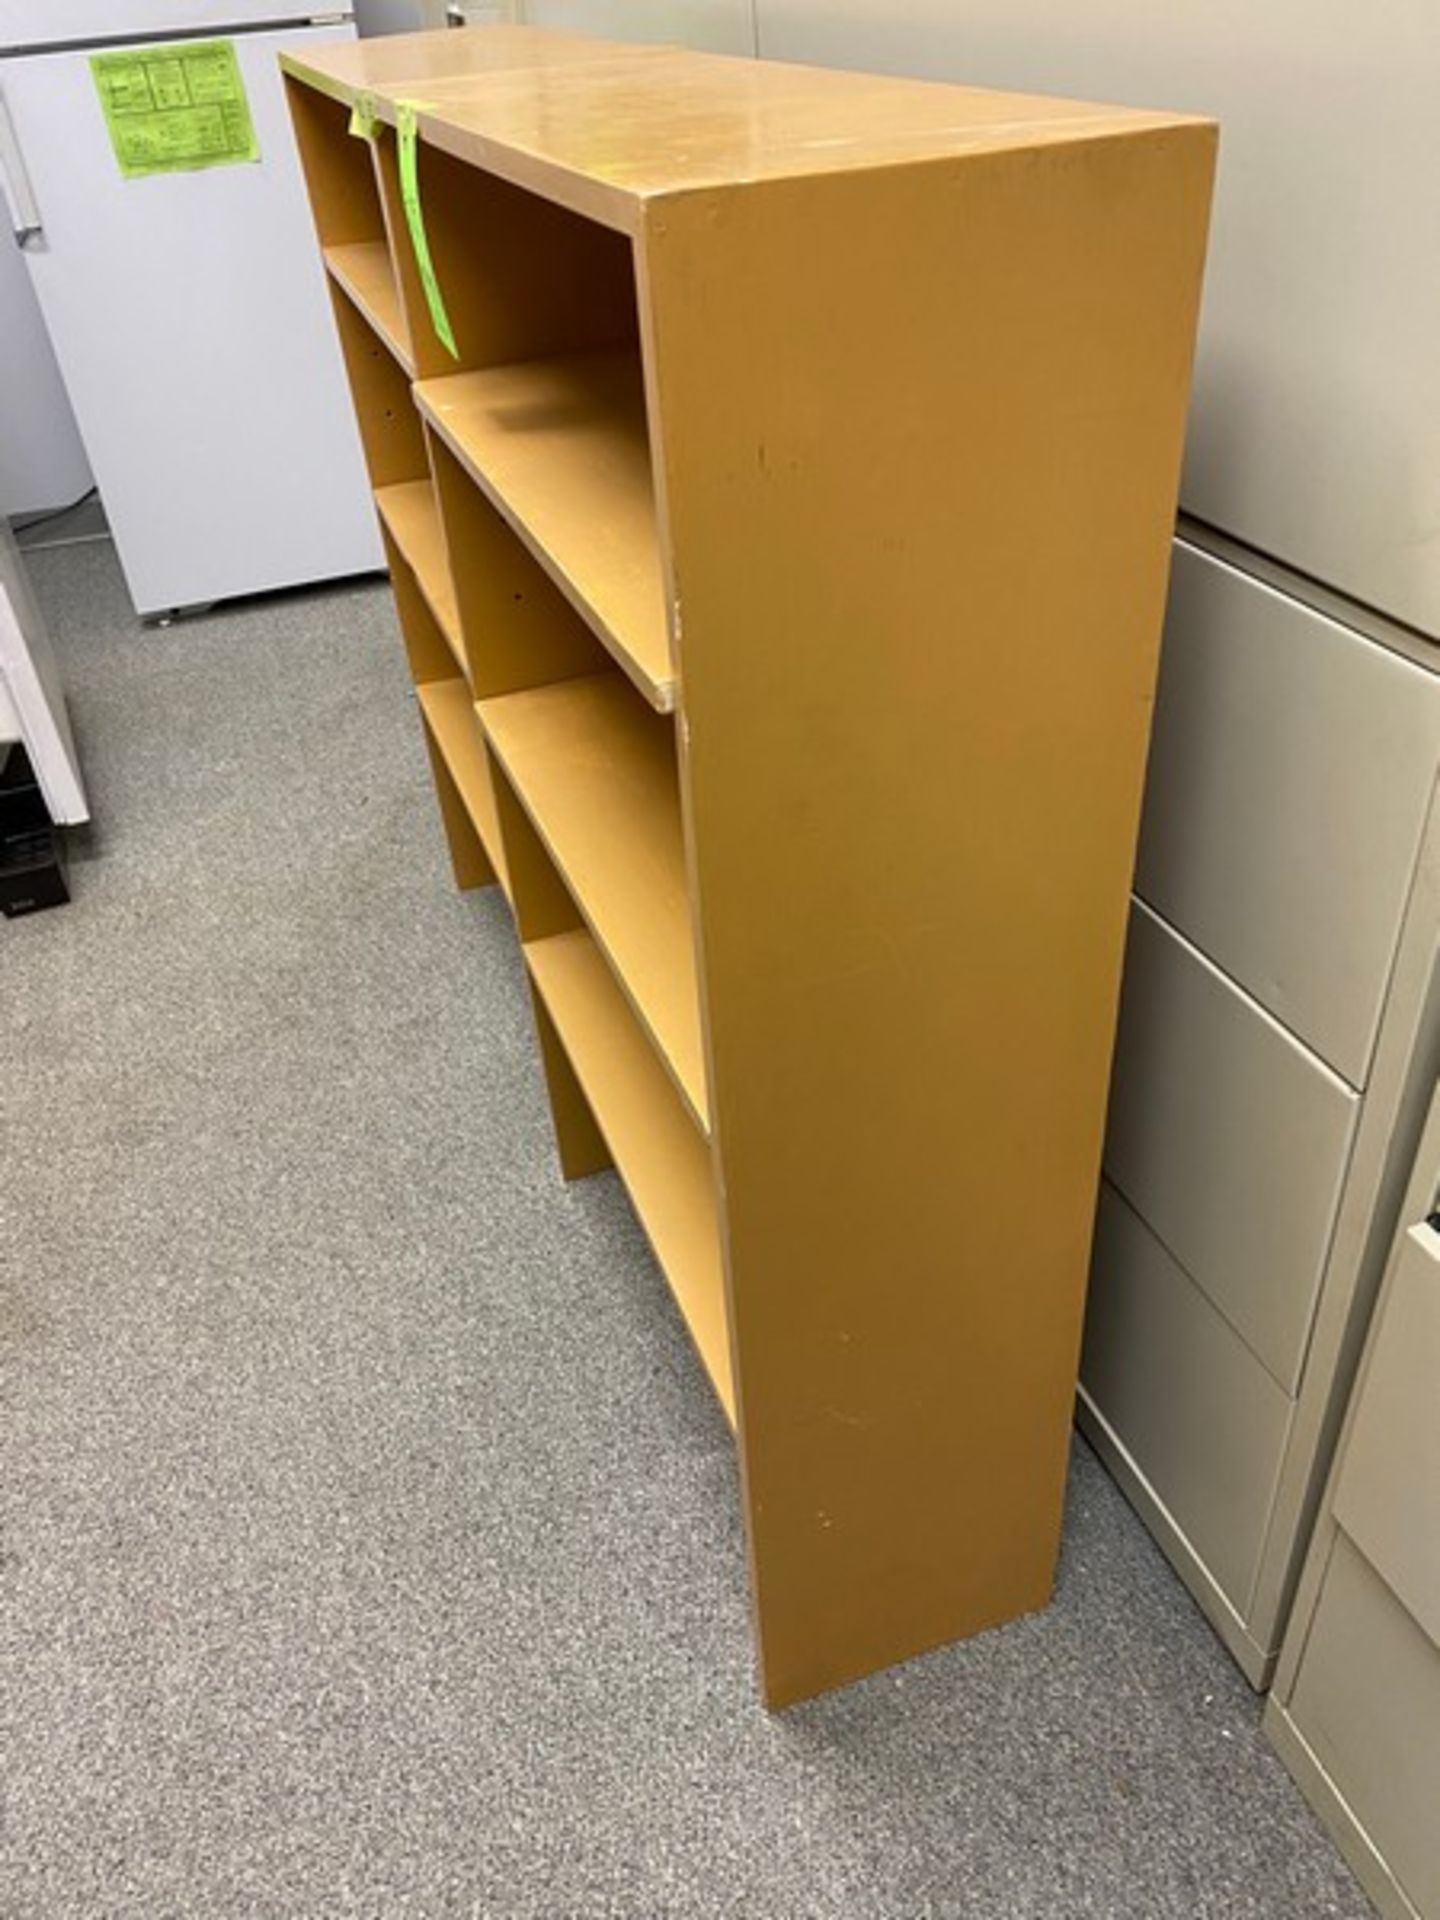 2 matching, painted wooden shelves. 29.5"Wx11.5"Dx48"H (Elevator Handling Fee $20) (Located New - Image 4 of 9